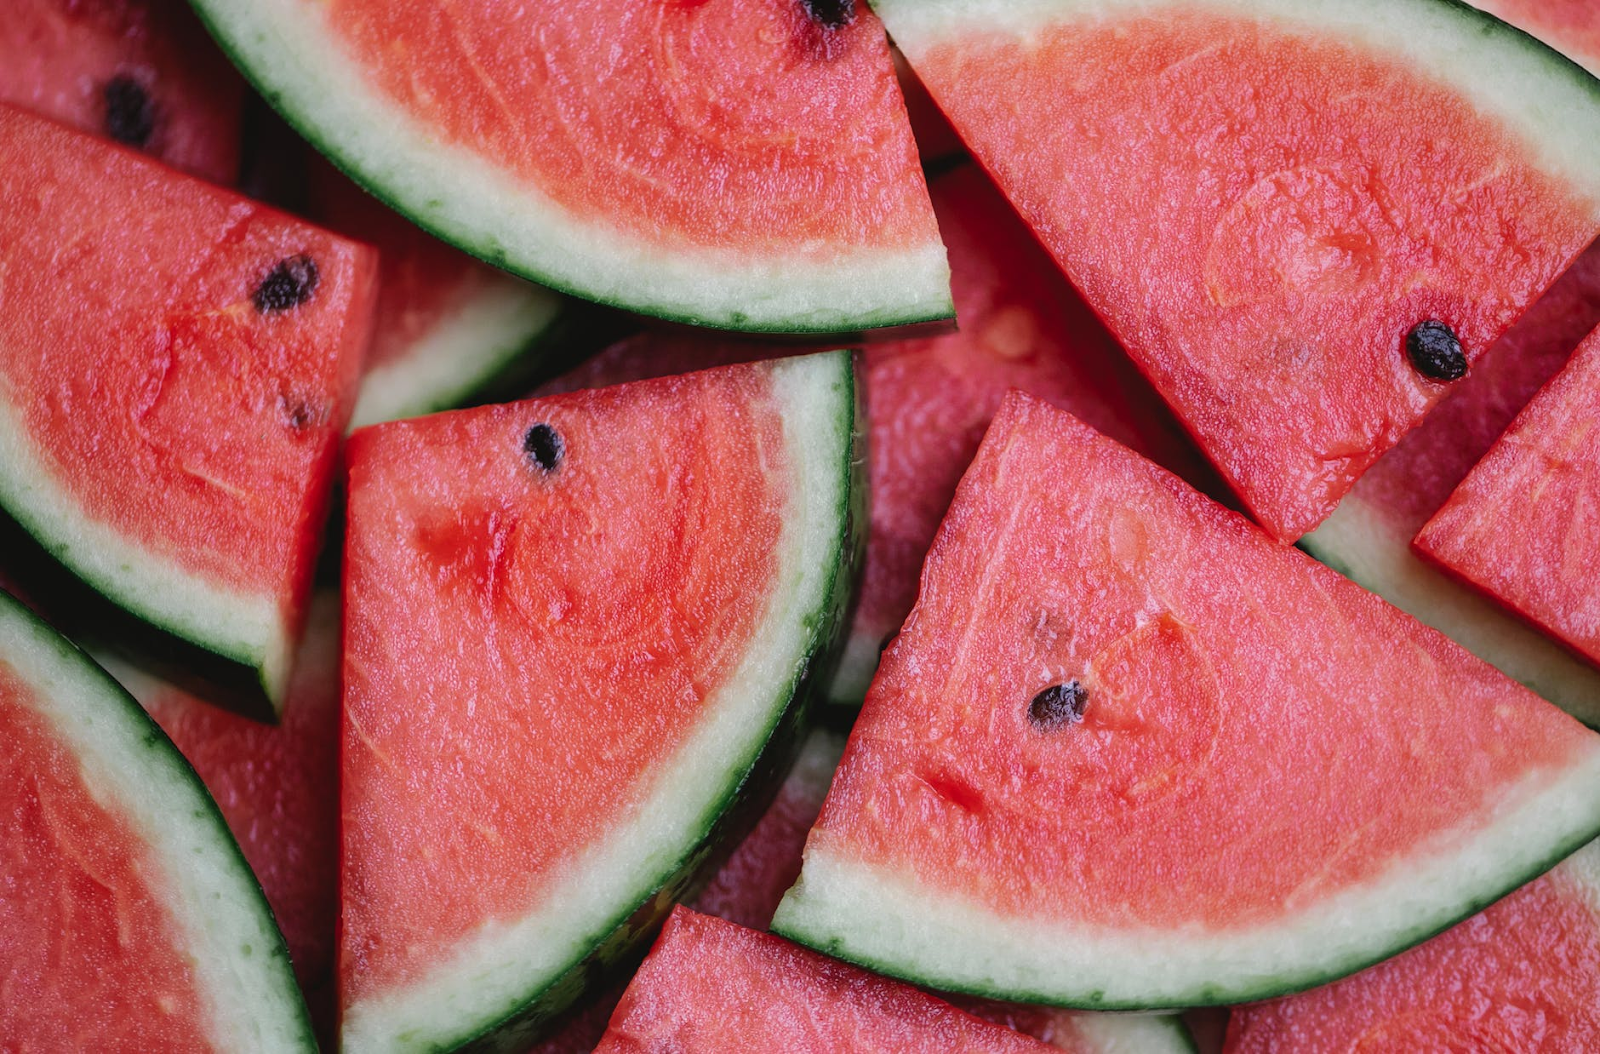 A close up of a watermelon

Description automatically generated with medium confidence